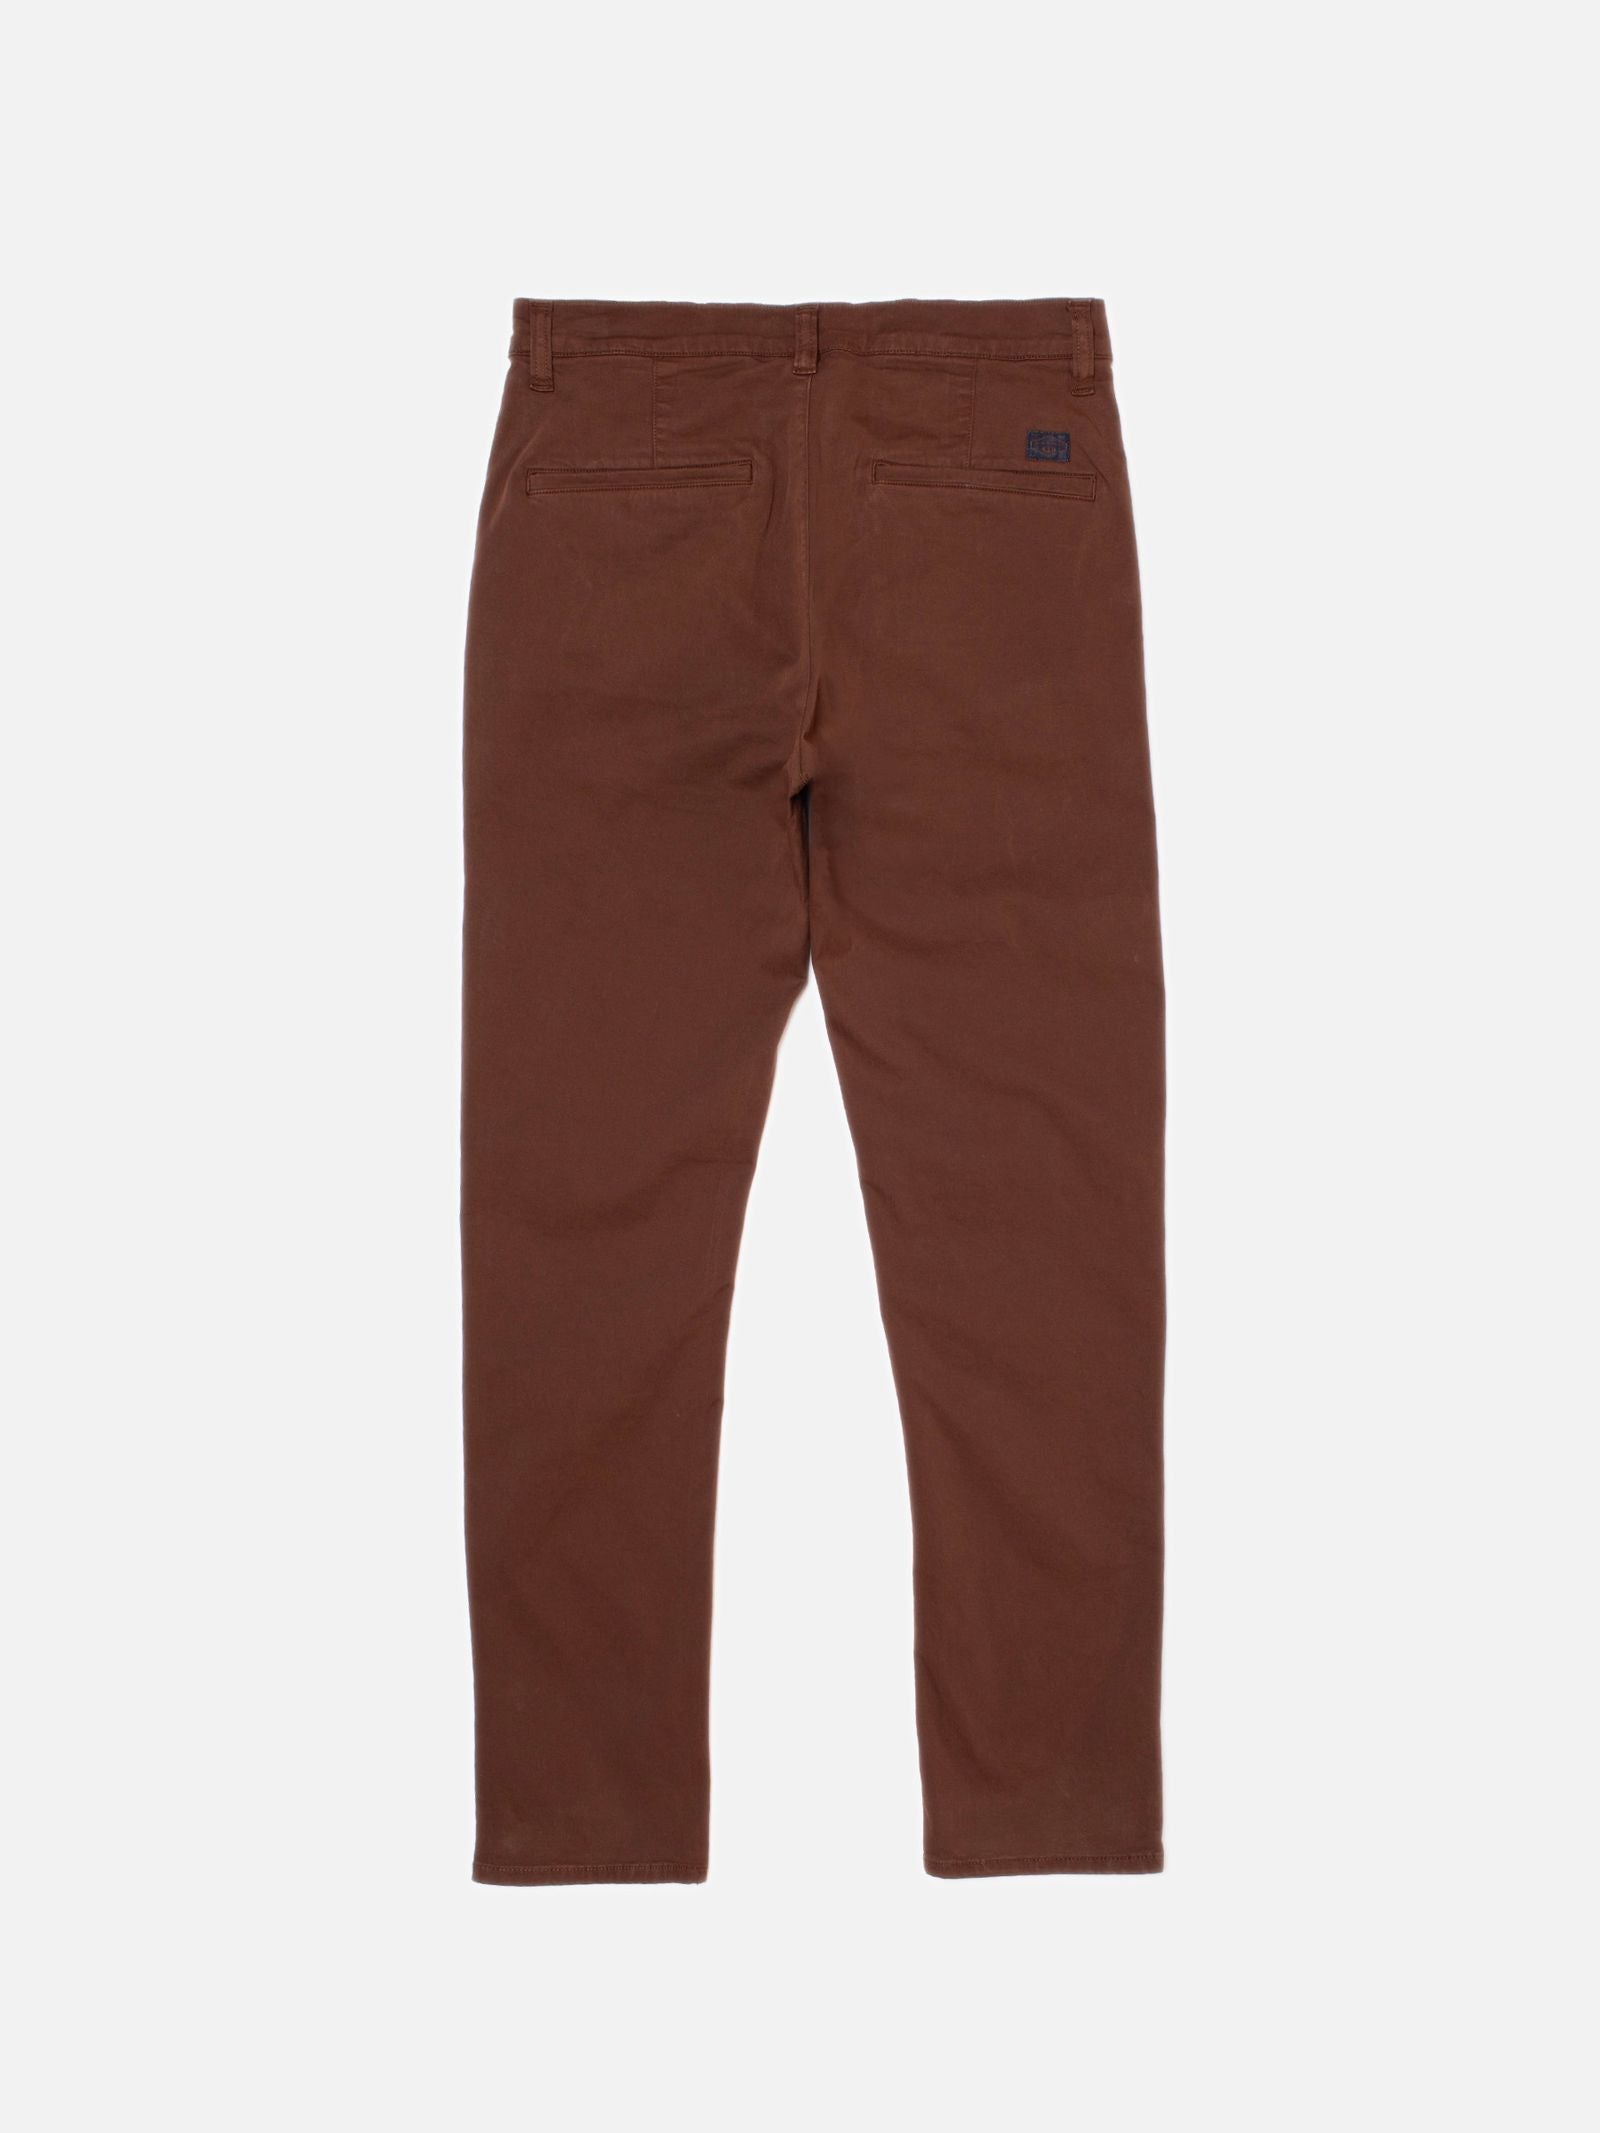 Nudie - Easy Alvin Chino - Washed Brown